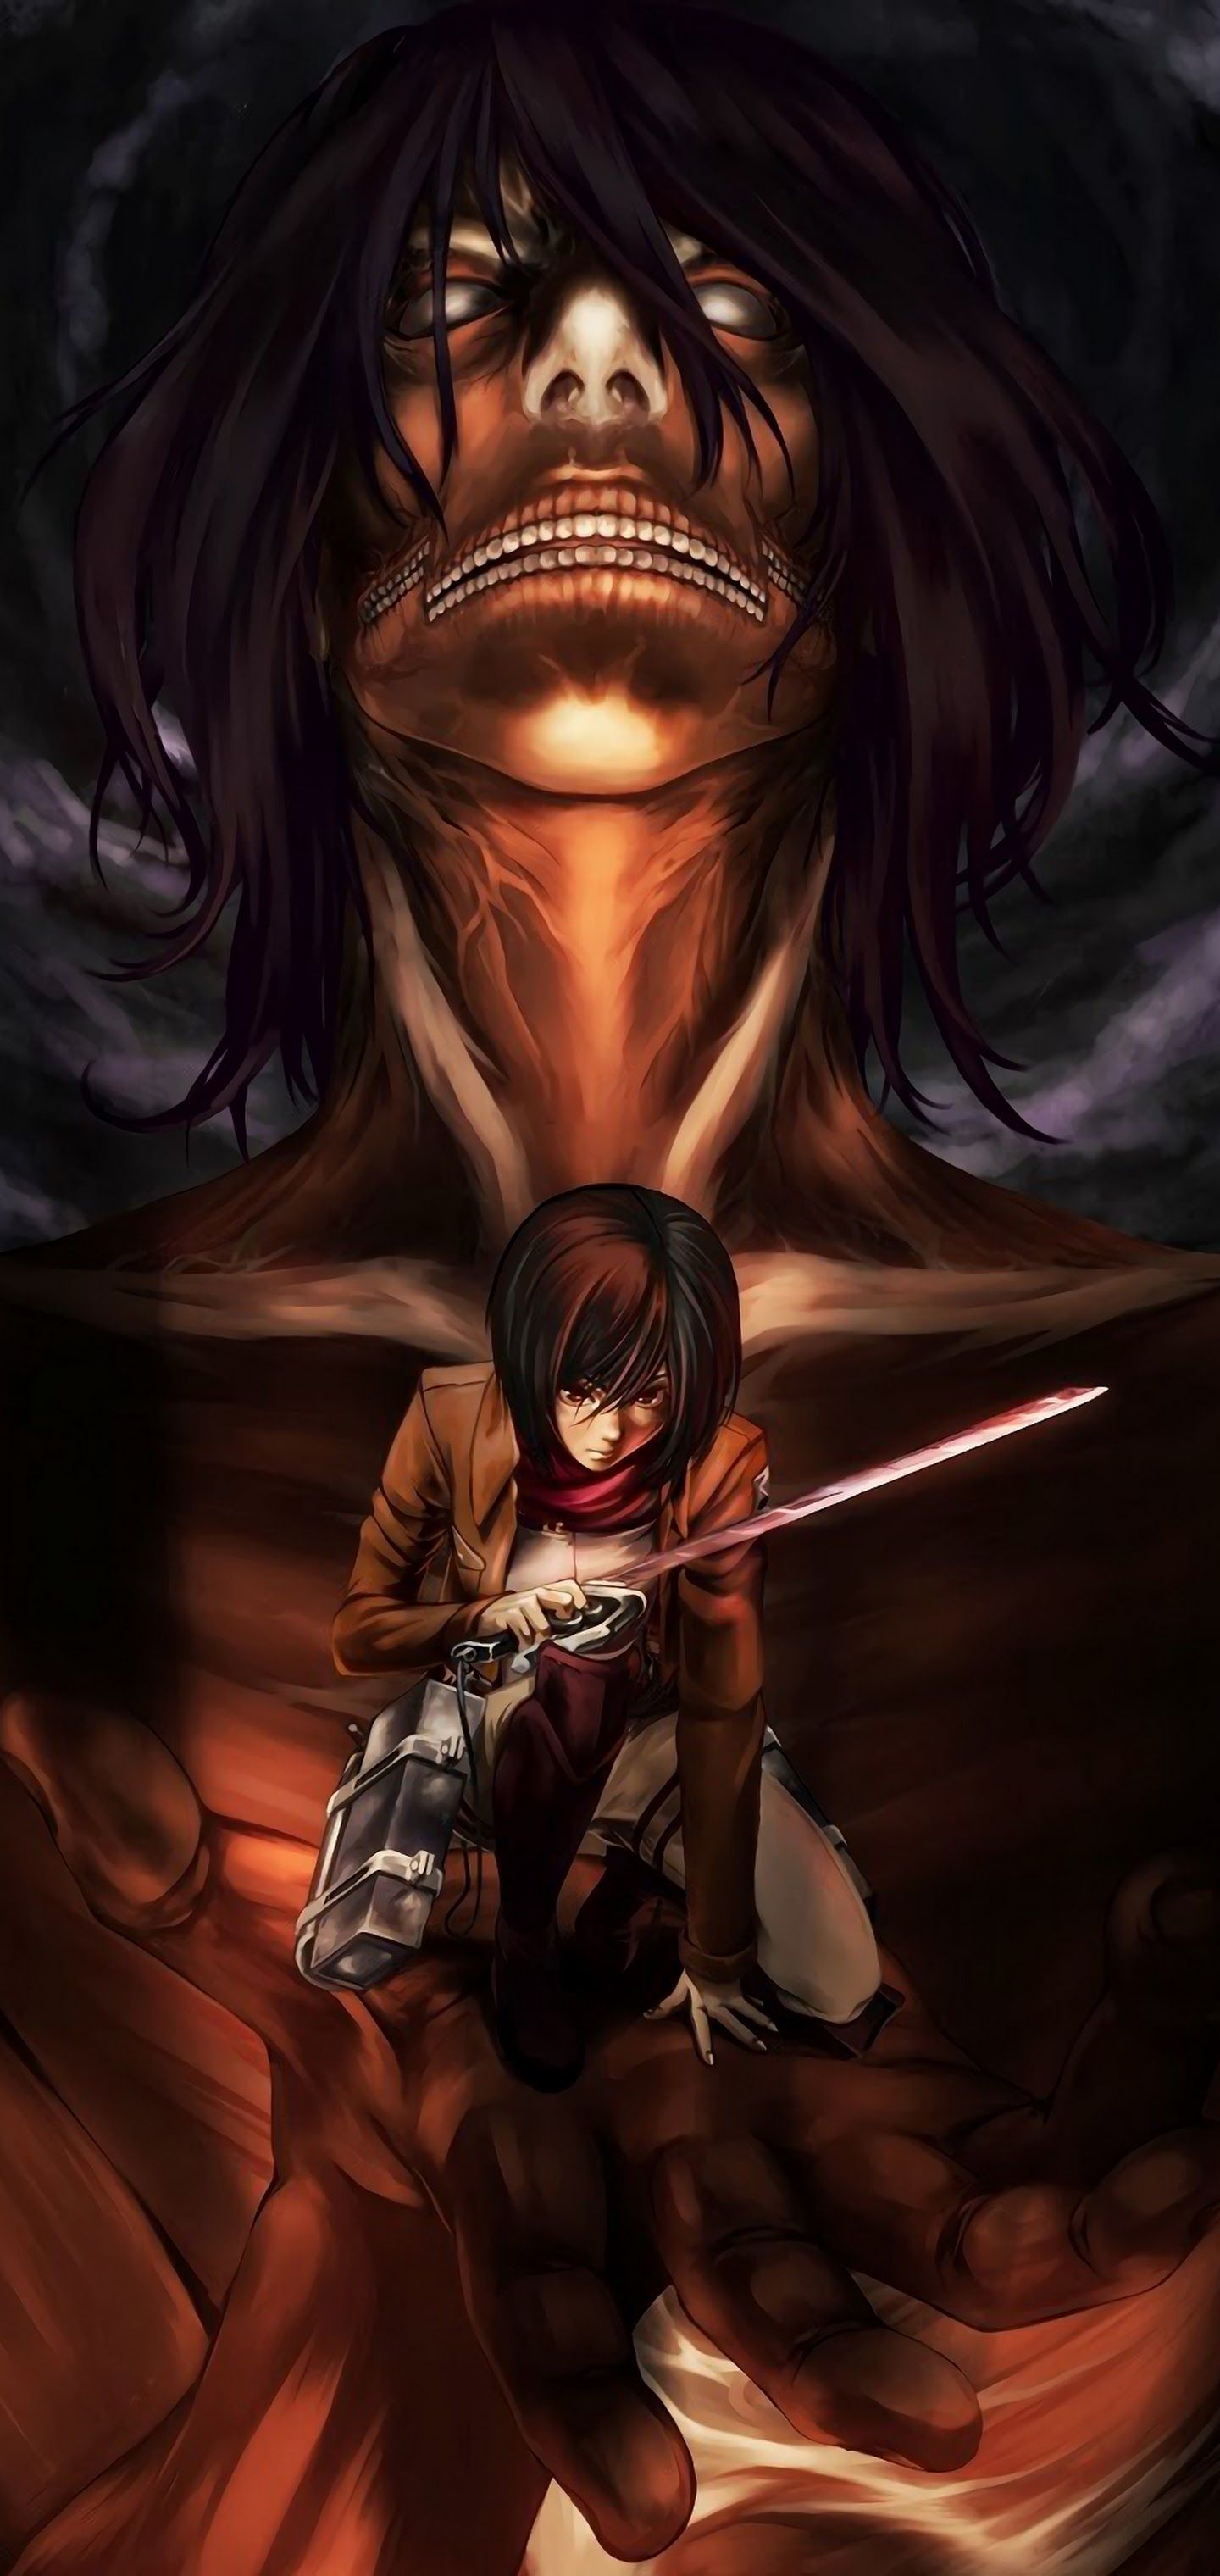 Attack On Titan Iphone Wallpapers Wallpaper Cave Armored titan wallpaper website by maxiuchiha22 on deviantart. attack on titan iphone wallpapers